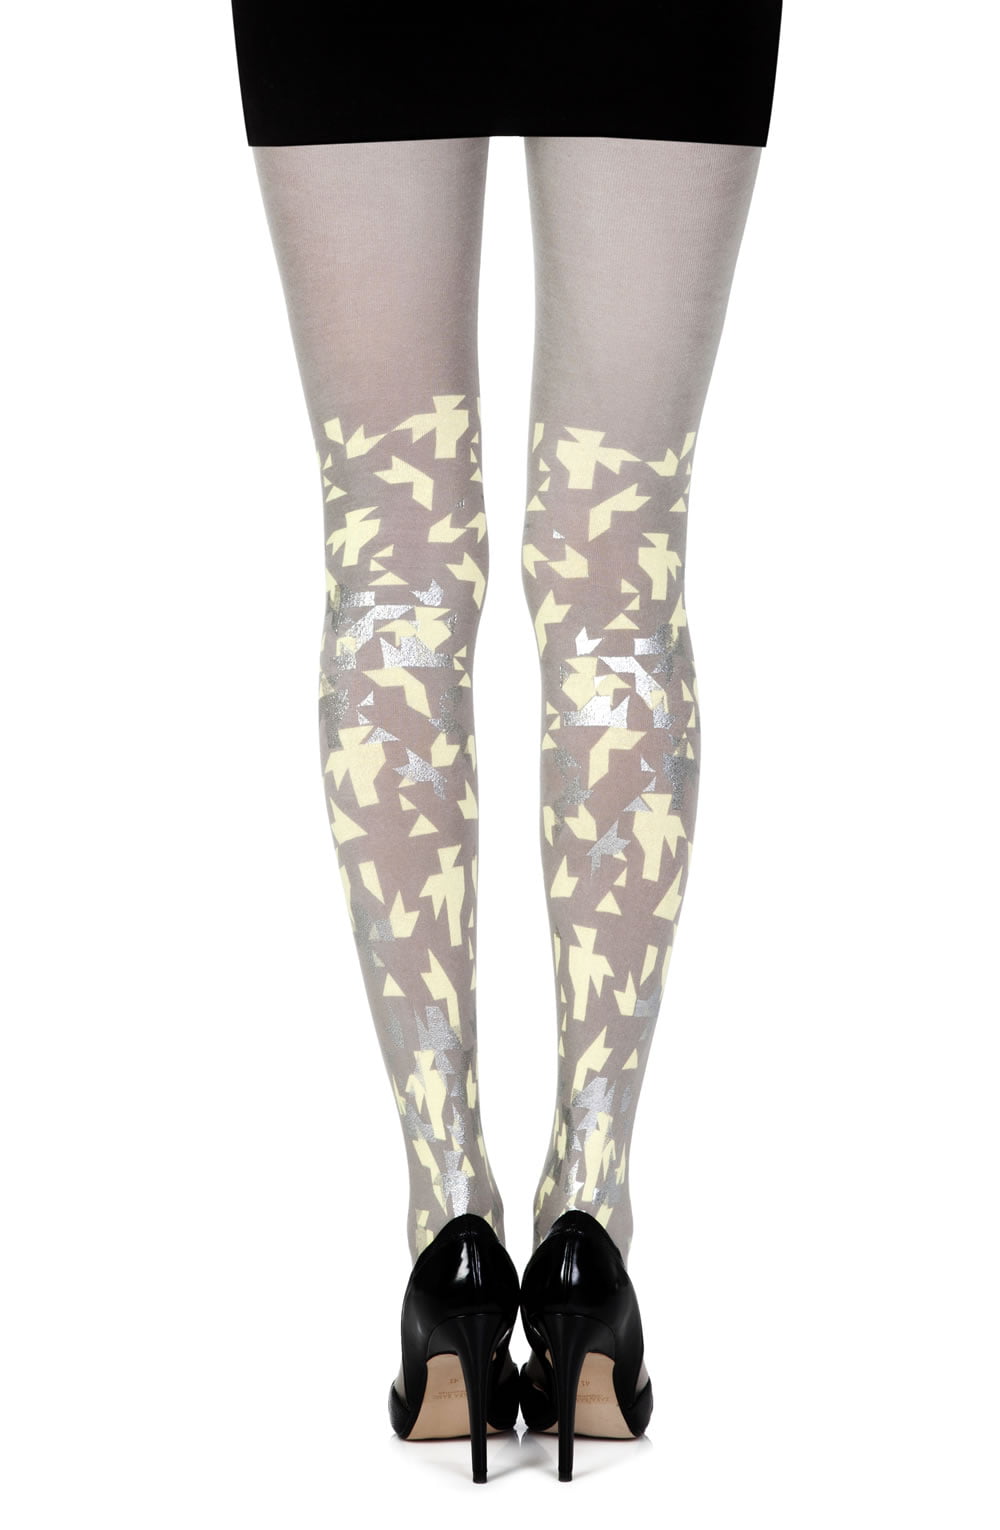 Vibrators, Sex Toy Kits and Sex Toys at Cloud9Adults - Zohara "Confetti" Grey Print Tights - Buy Sex Toys Online